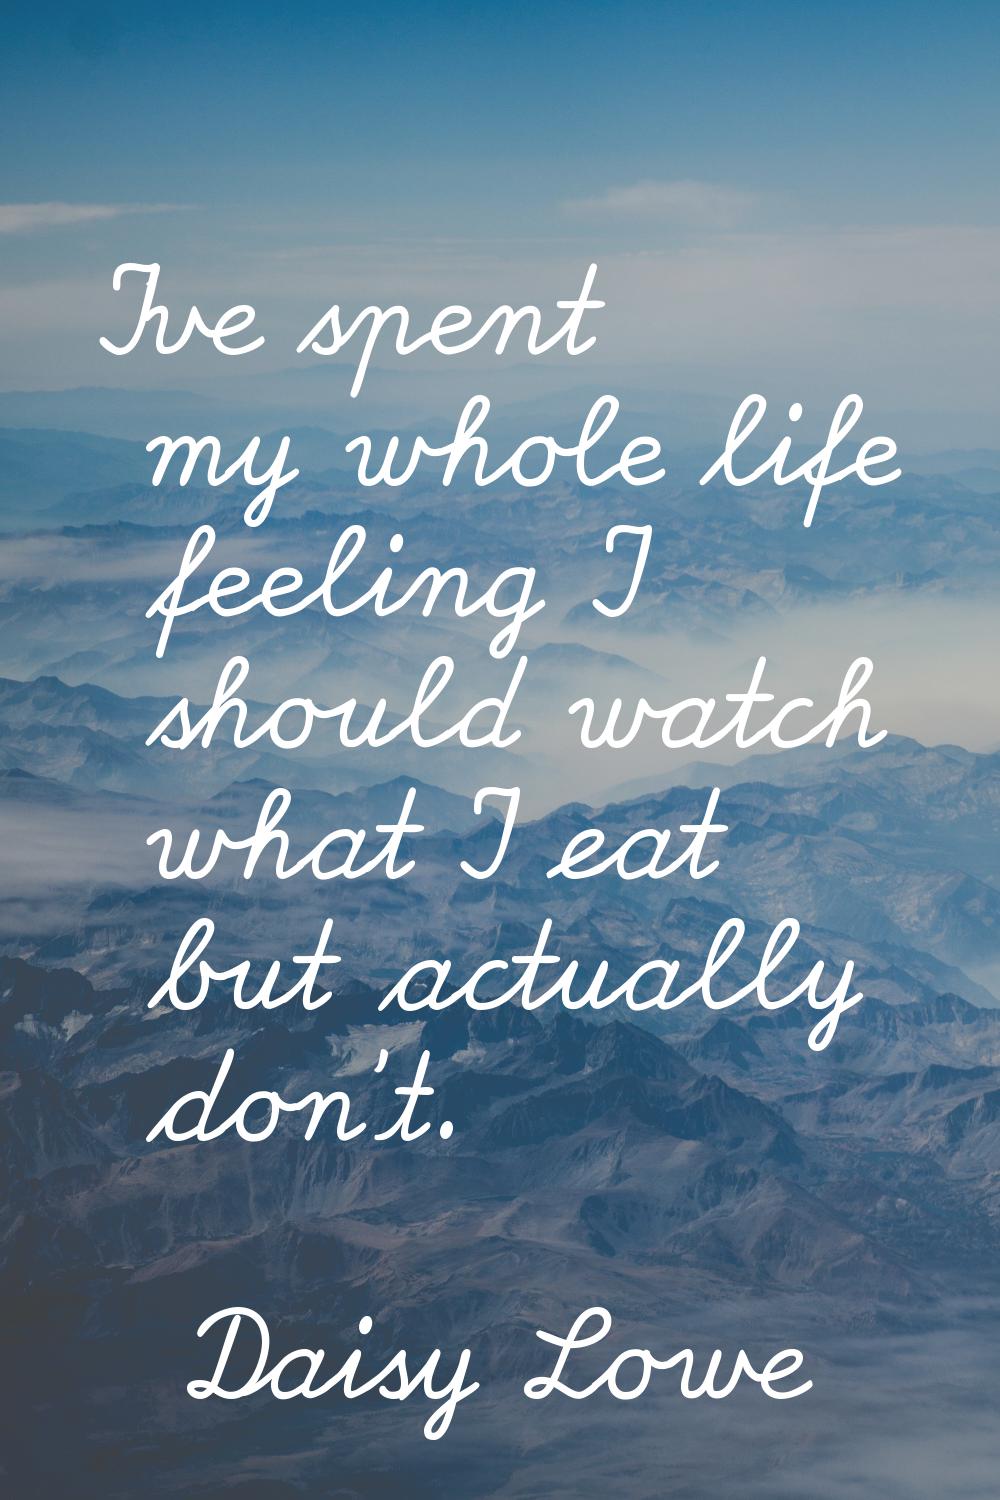 I've spent my whole life feeling I should watch what I eat but actually don't.